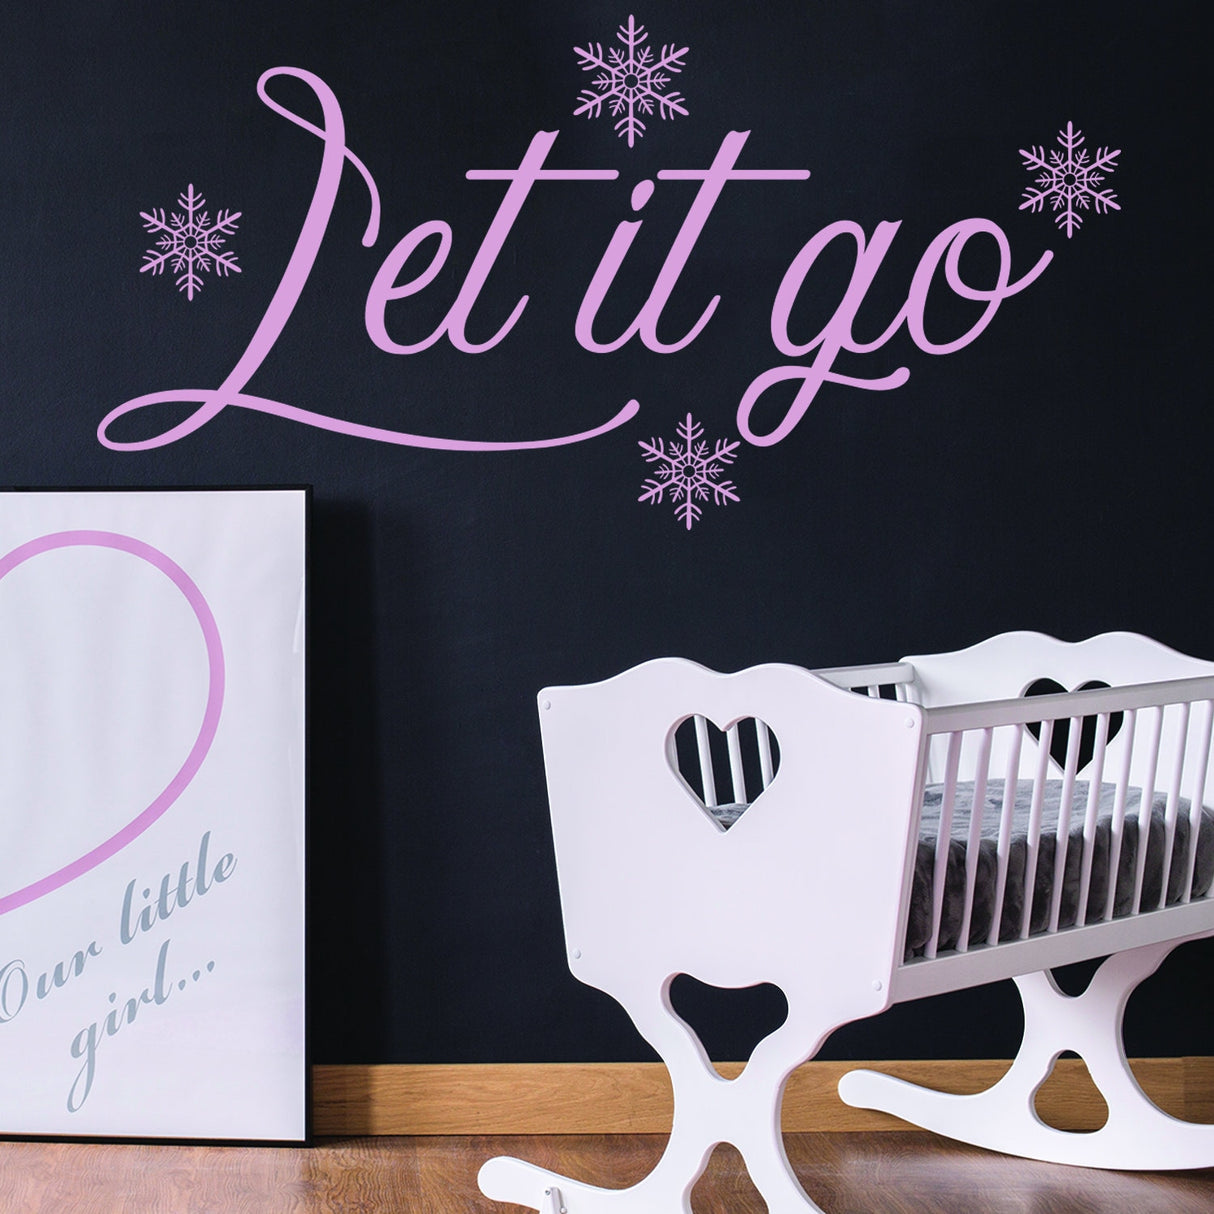 Let It Go Quote Wall Sticker - Positive Sayings Snowflakes God Family Time Decal